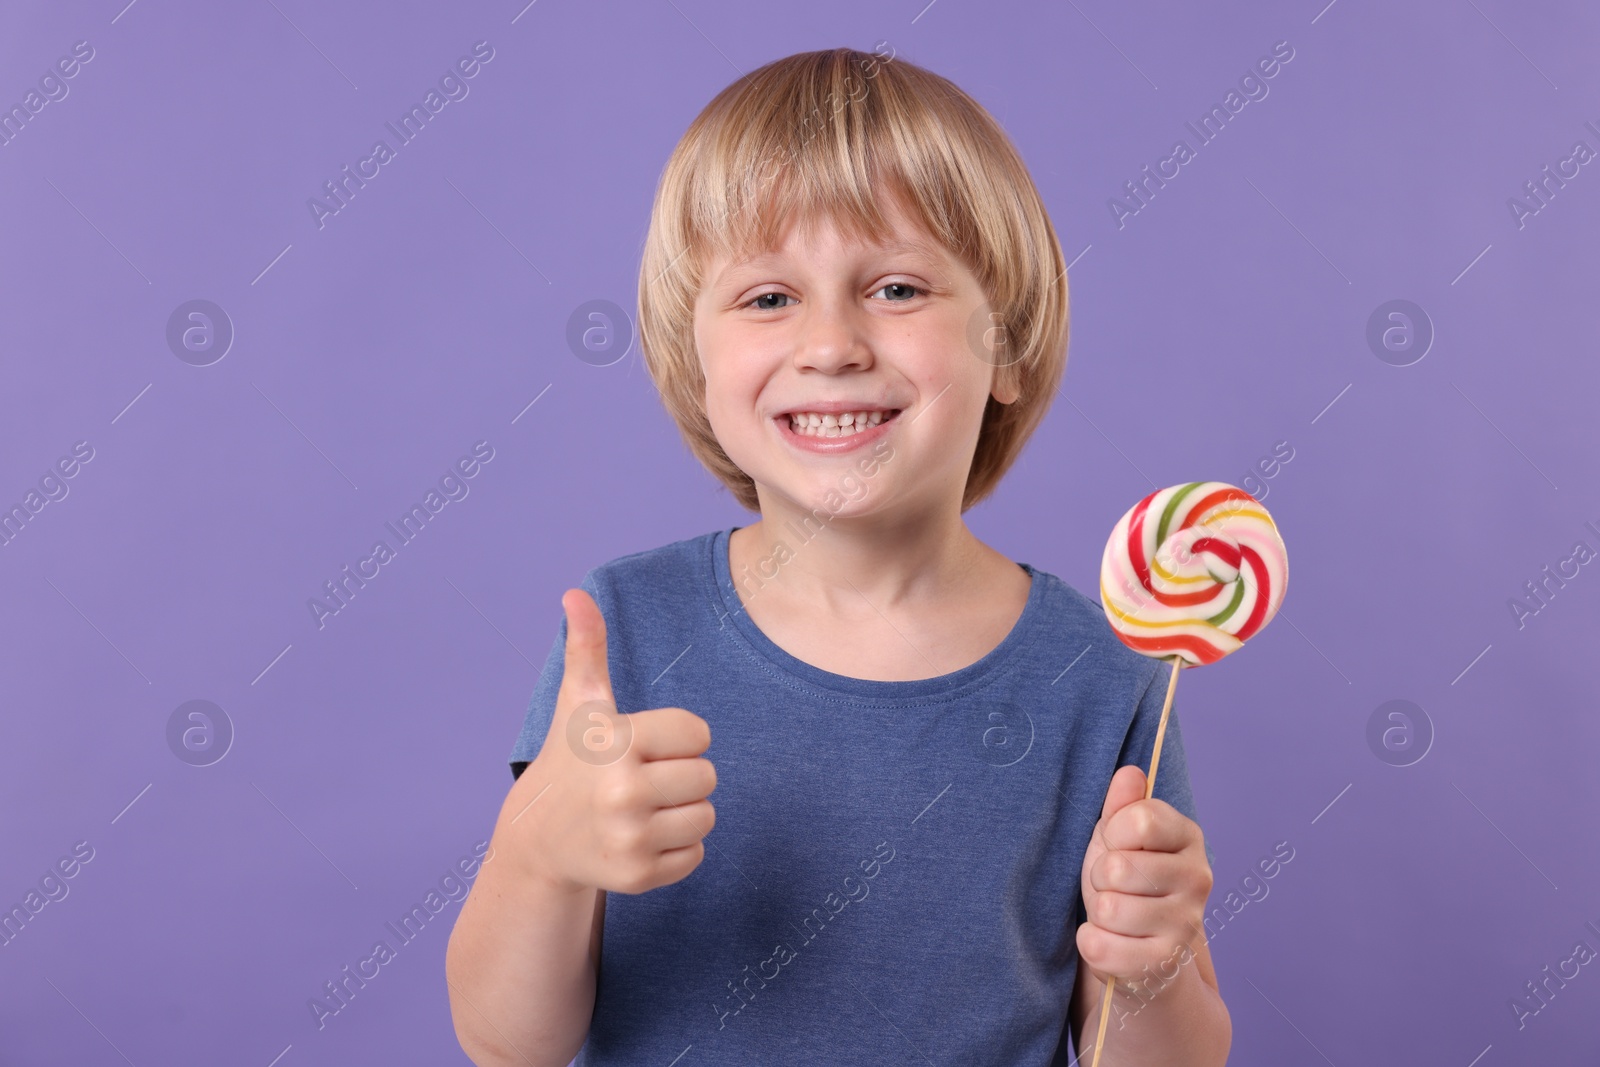 Photo of Happy little boy with colorful lollipop swirl showing thumbs up on violet background